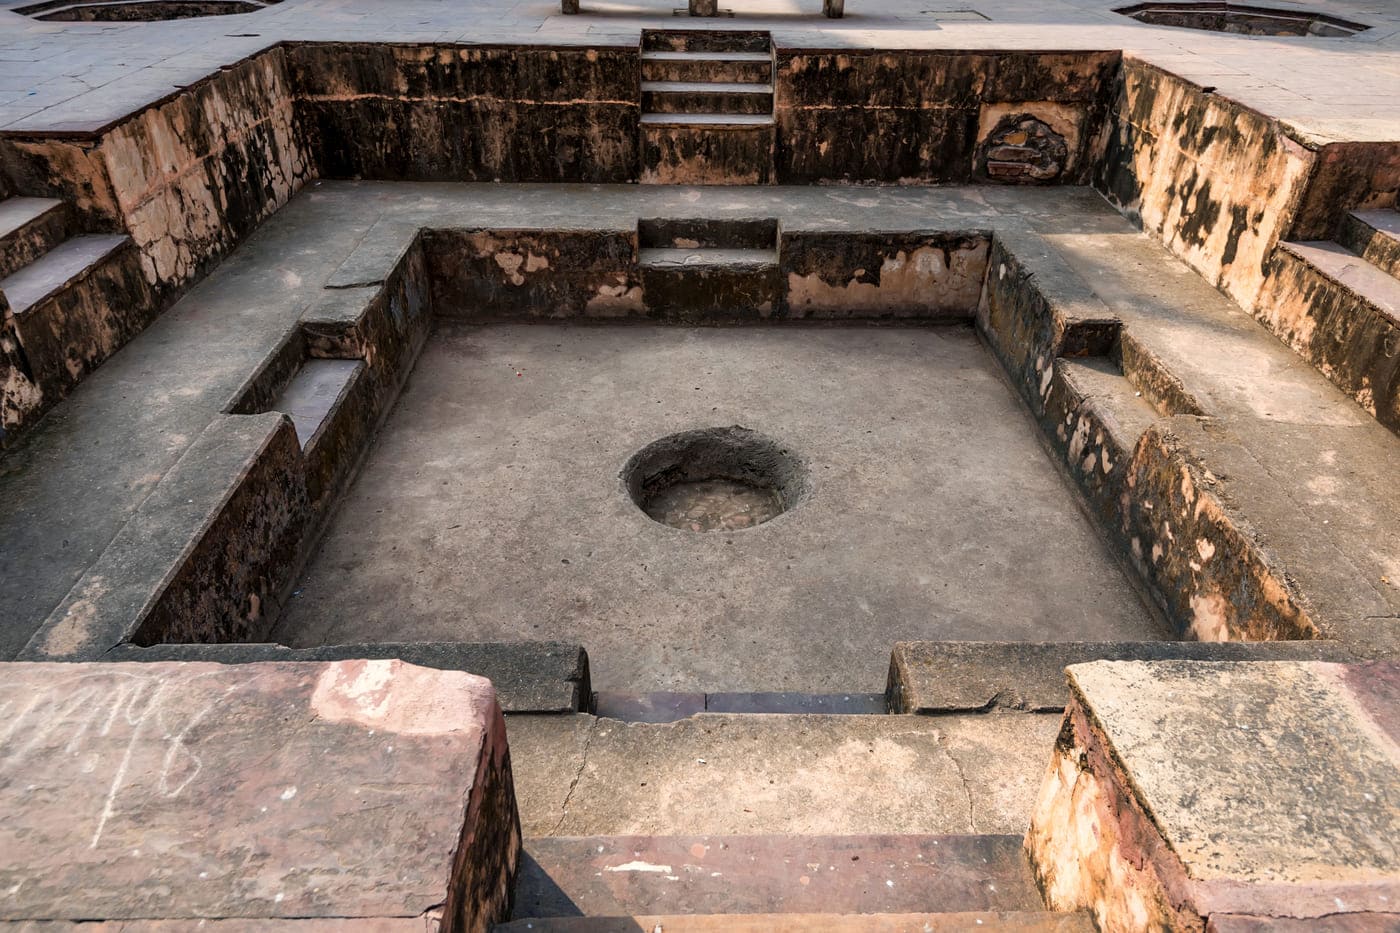 Now empty, the ancient swimming pool at Jahangir Mahal inside the Orchha Fort Complex was meant for the royals to bathe 